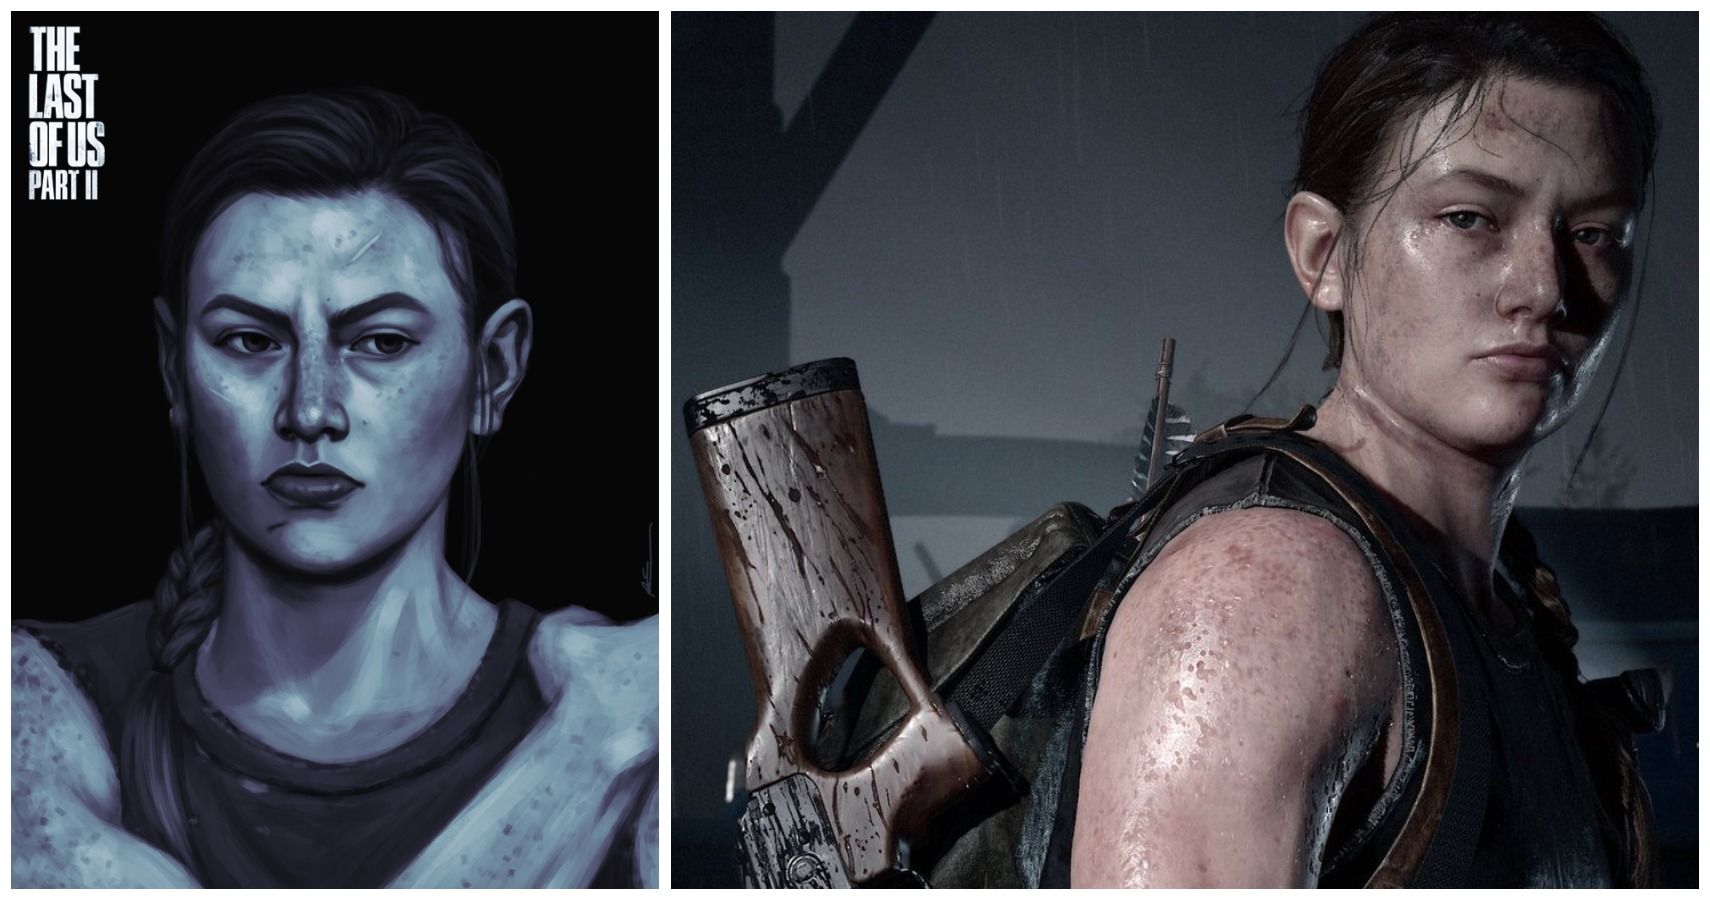 The Last of Us' fans think an important season 2 character had a